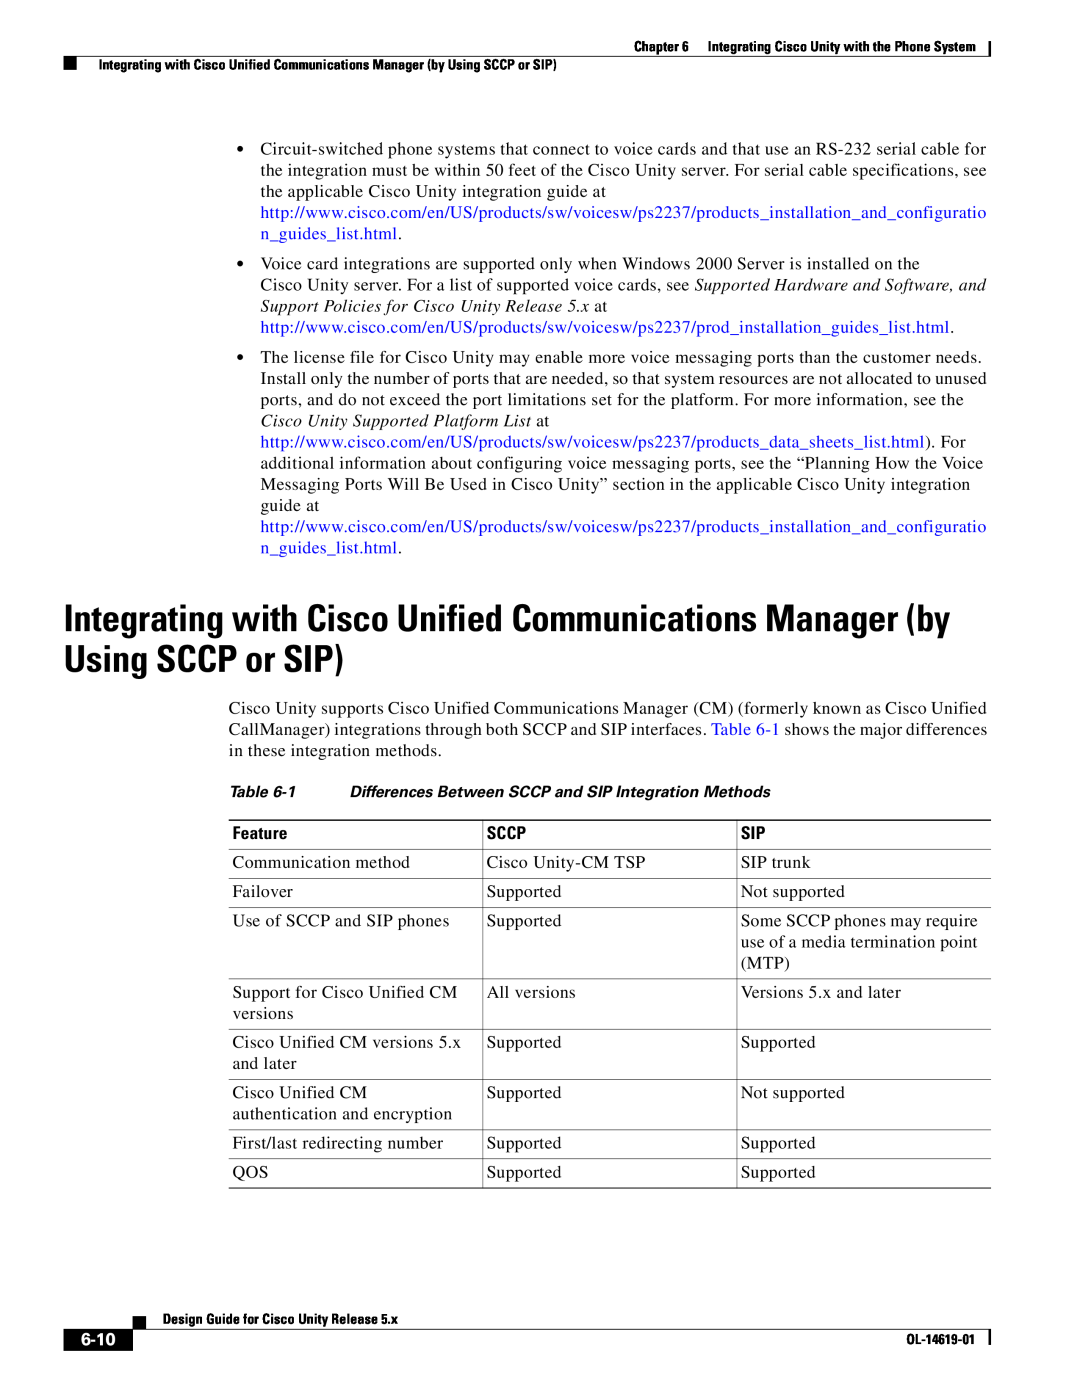 Cisco Systems OL-14619-01 manual Feature, Sccp, 6-10, Differences Between SCCP and SIP Integration Methods 